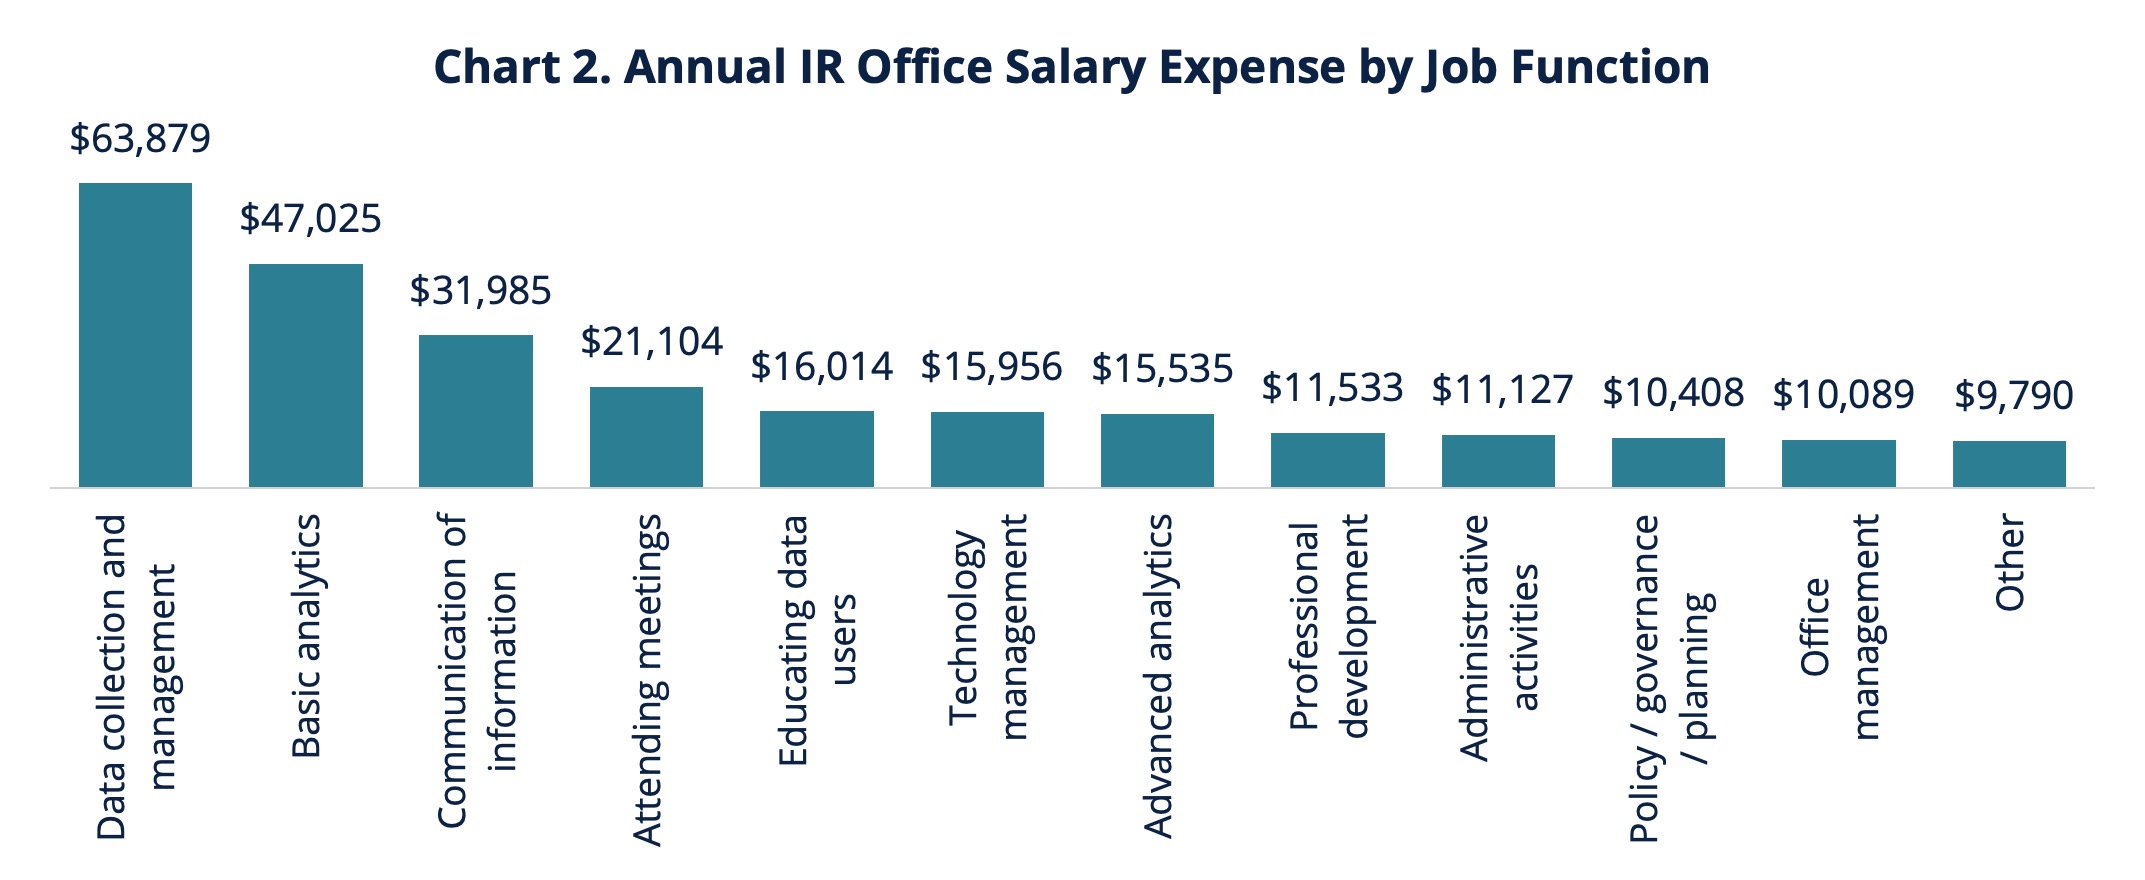 Chart 2. Annual IR Office Salary Expense by Job Function